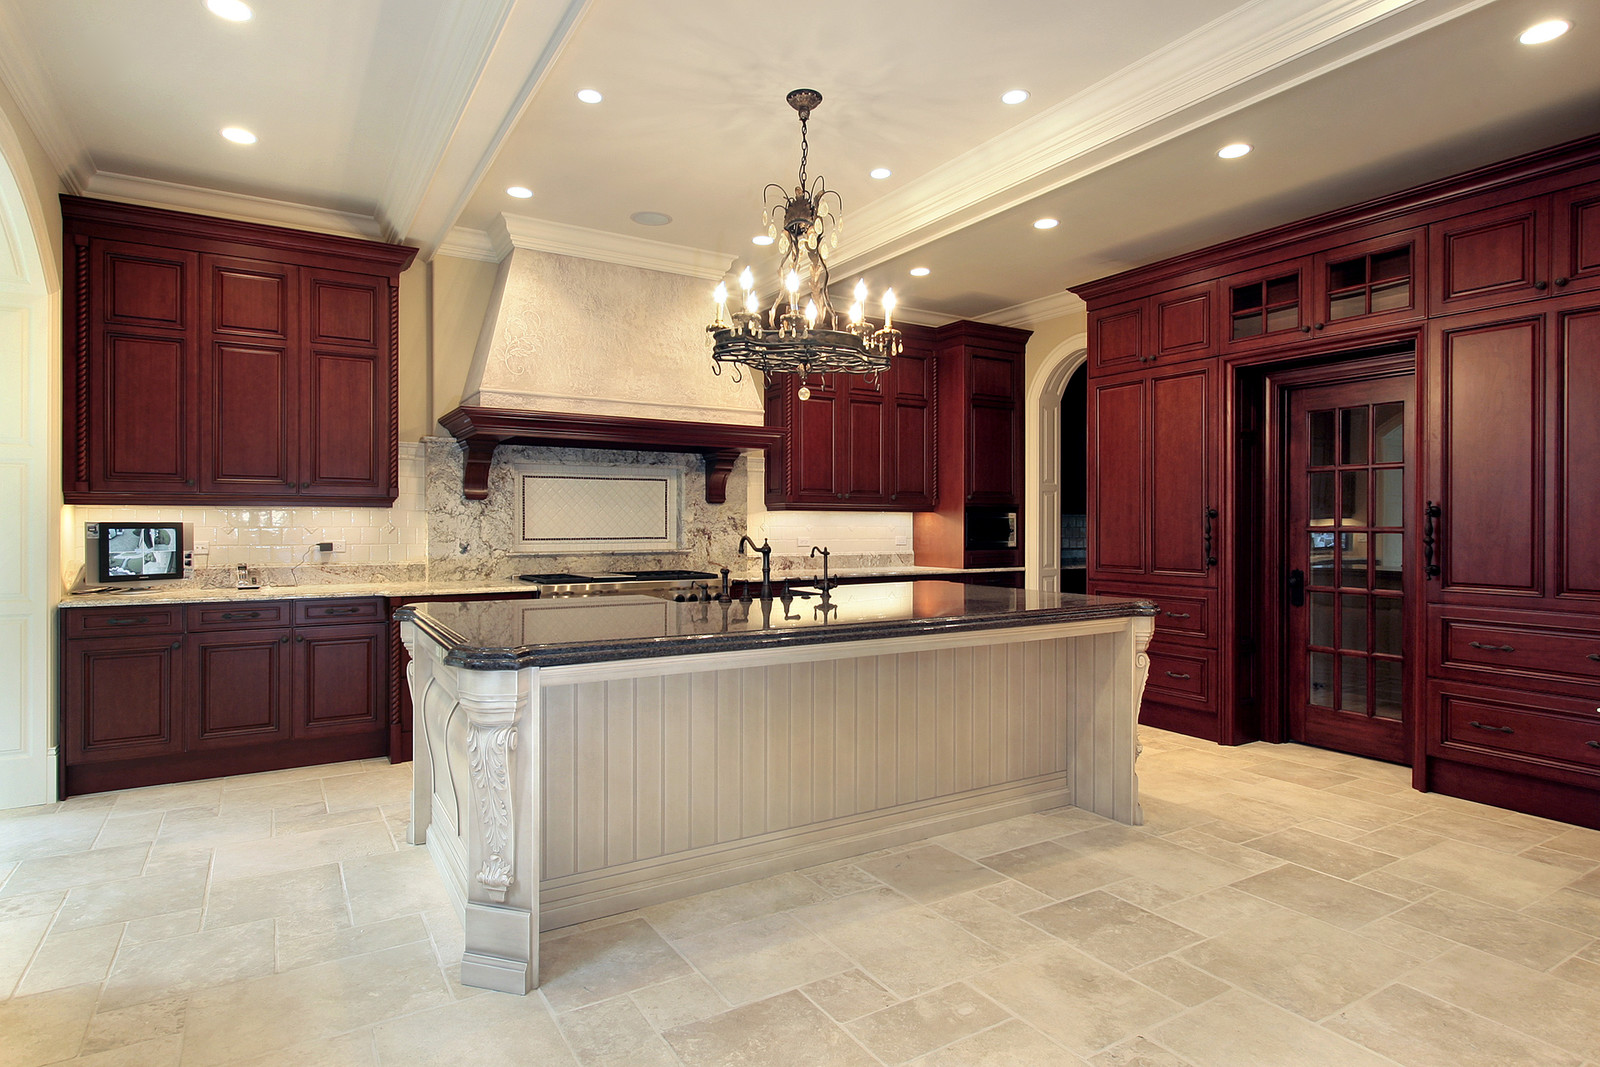 Wildfire Design & Build-Provencal Dark Cherry Wood Raised Panel Cabinets-New Kitchen Remodel